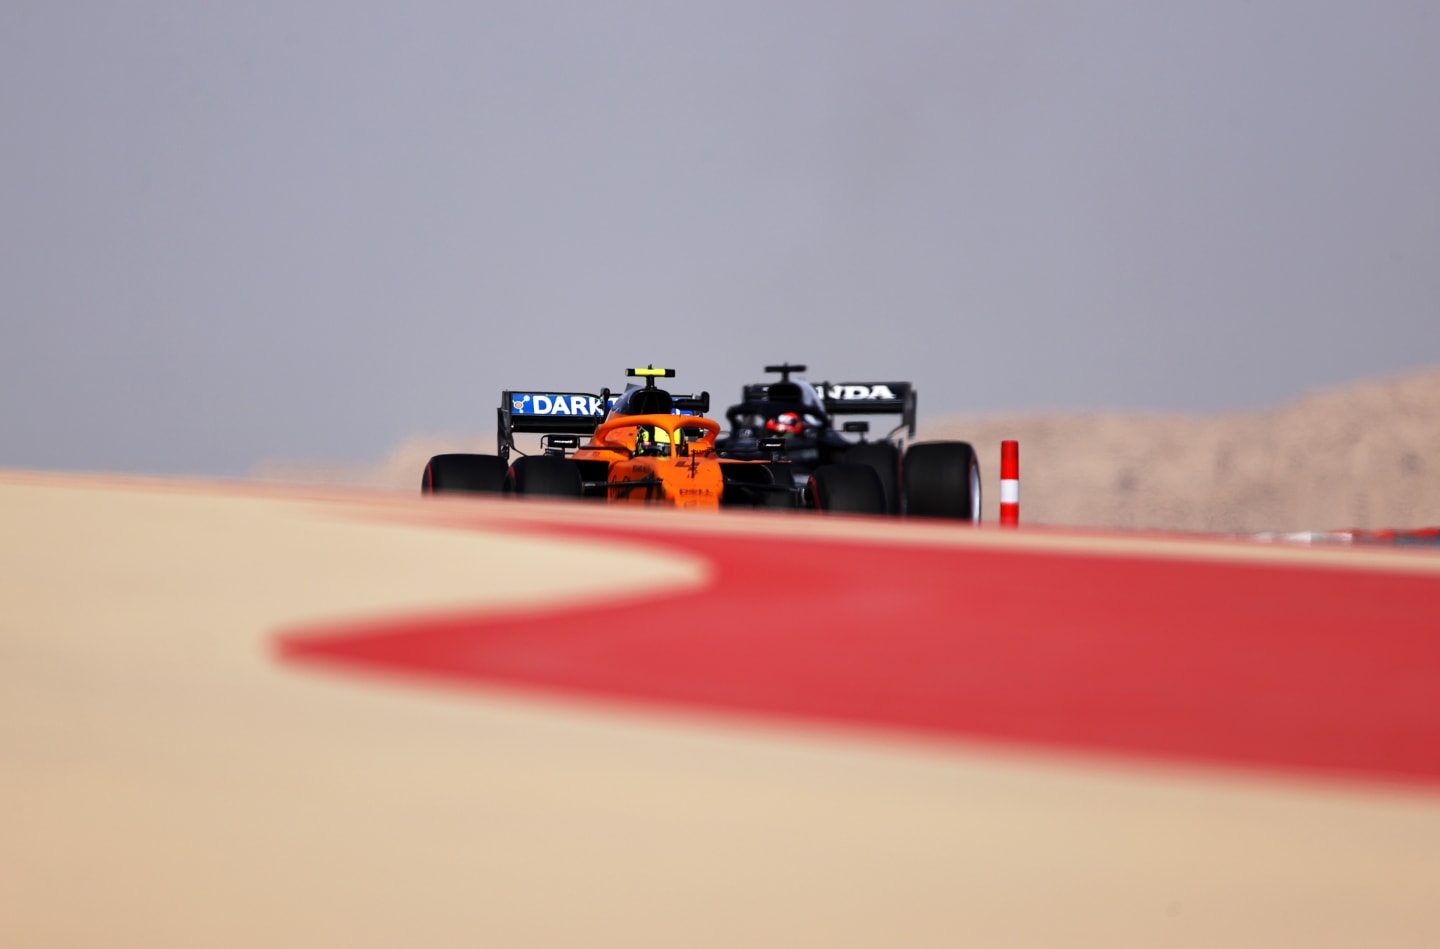 BAHRAIN, BAHRAIN - MARCH 26: Lando Norris of Great Britain driving the (4) McLaren F1 Team MCL35M Mercedes and Yuki Tsunoda of Japan driving the (22) Scuderia AlphaTauri AT02 Honda drive on track during practice ahead of the F1 Grand Prix of Bahrain at Bahrain International Circuit on March 26, 2021 in Bahrain, Bahrain. (Photo by Lars Baron/Getty Images)